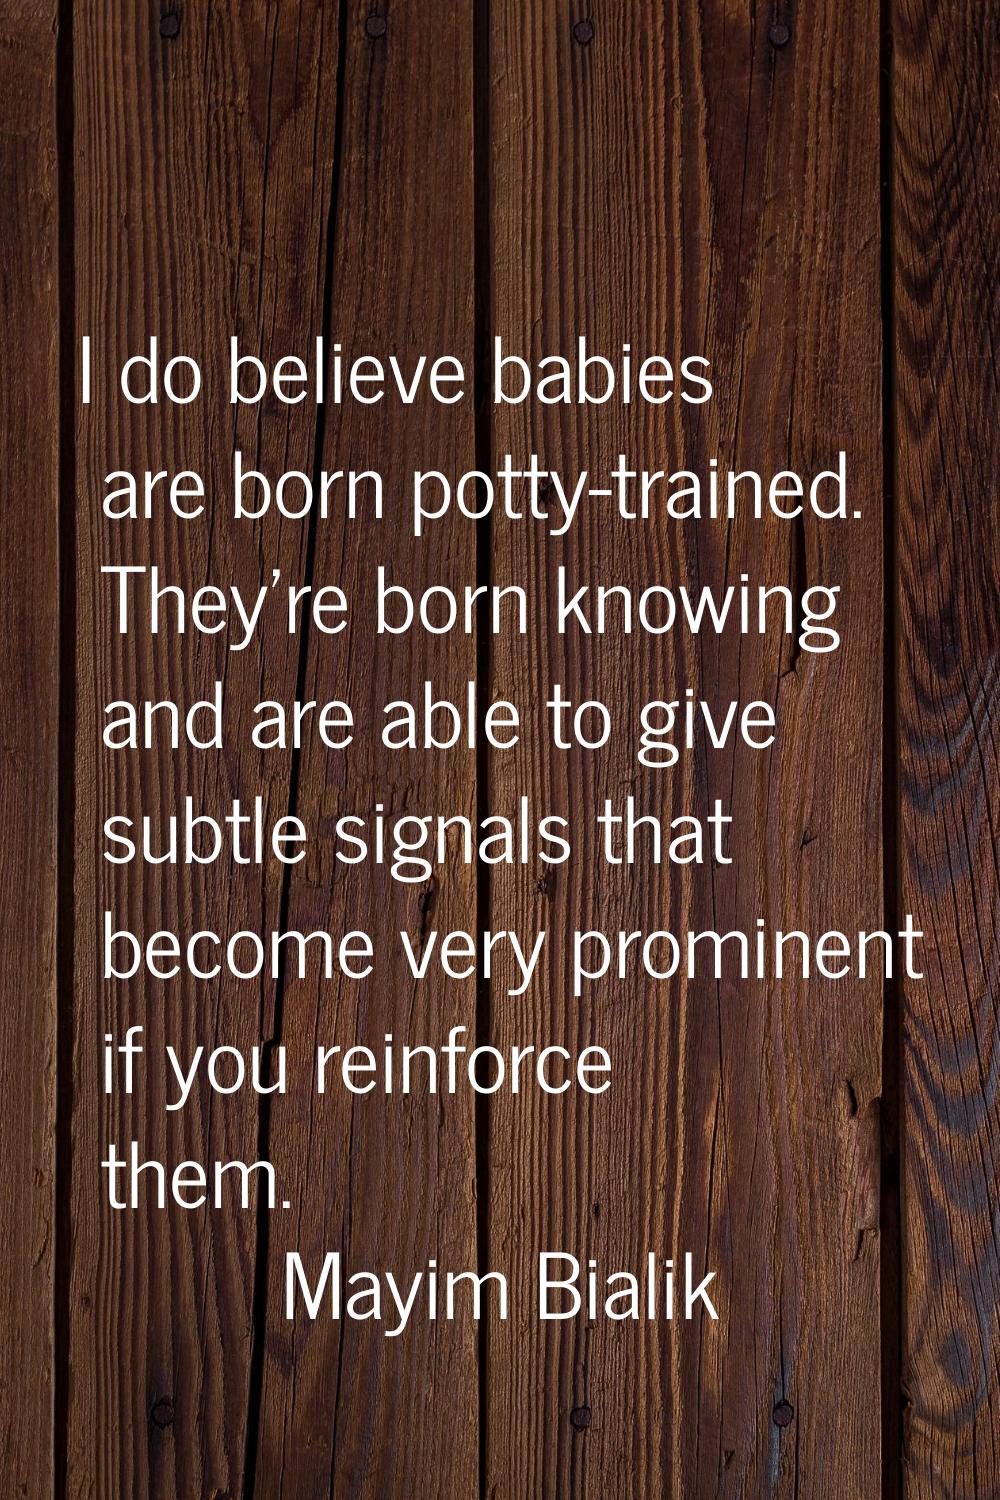 I do believe babies are born potty-trained. They're born knowing and are able to give subtle signal